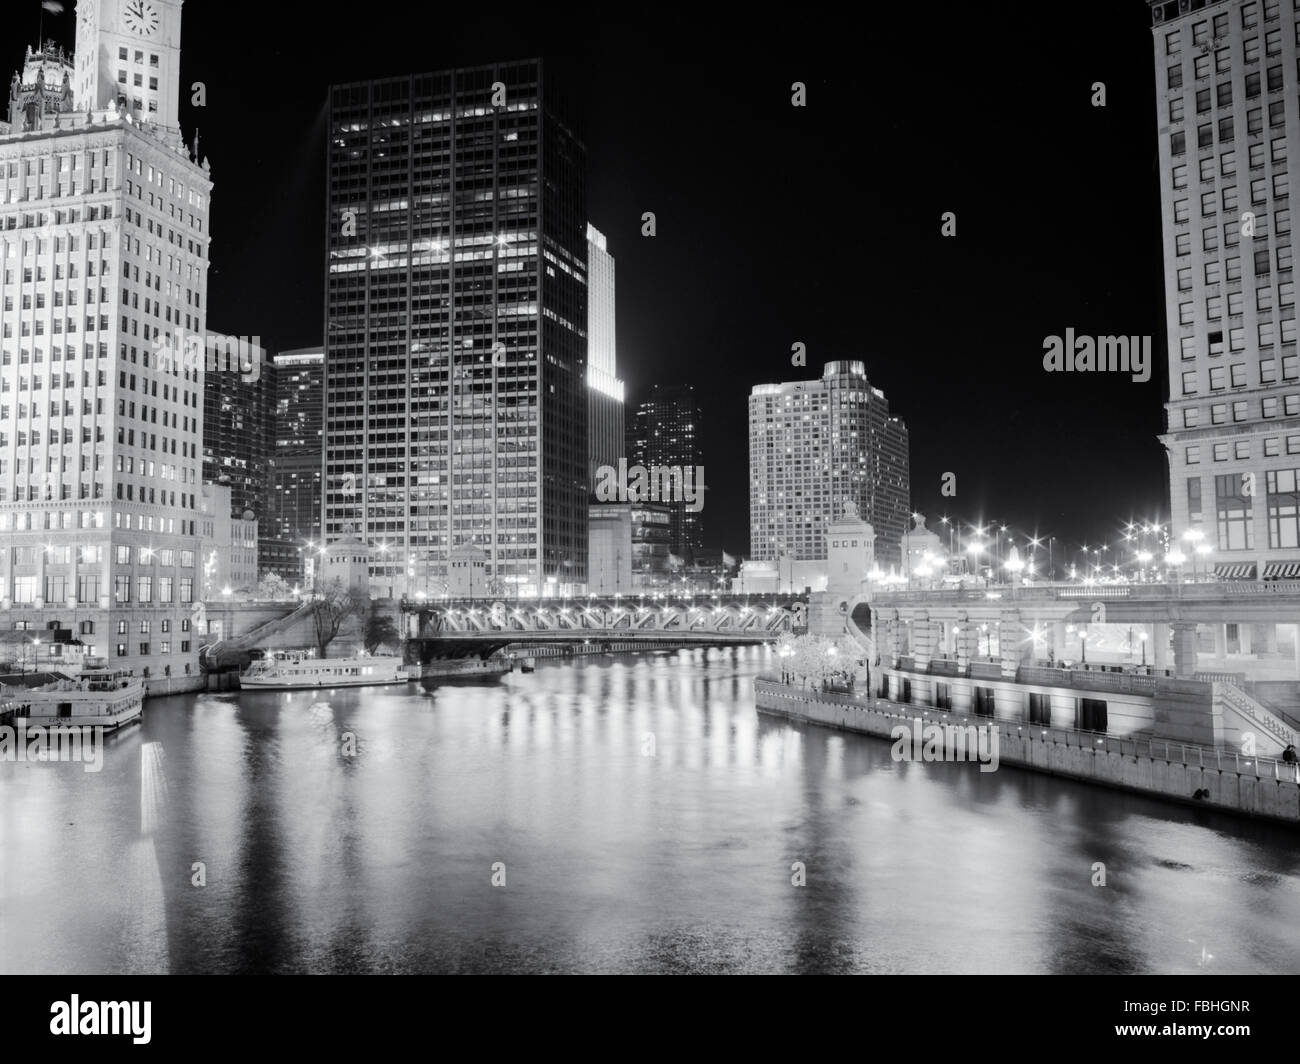 Michigan Avenue Bridge over the Chicago River as seen from Wabash at nigh Stock Photo